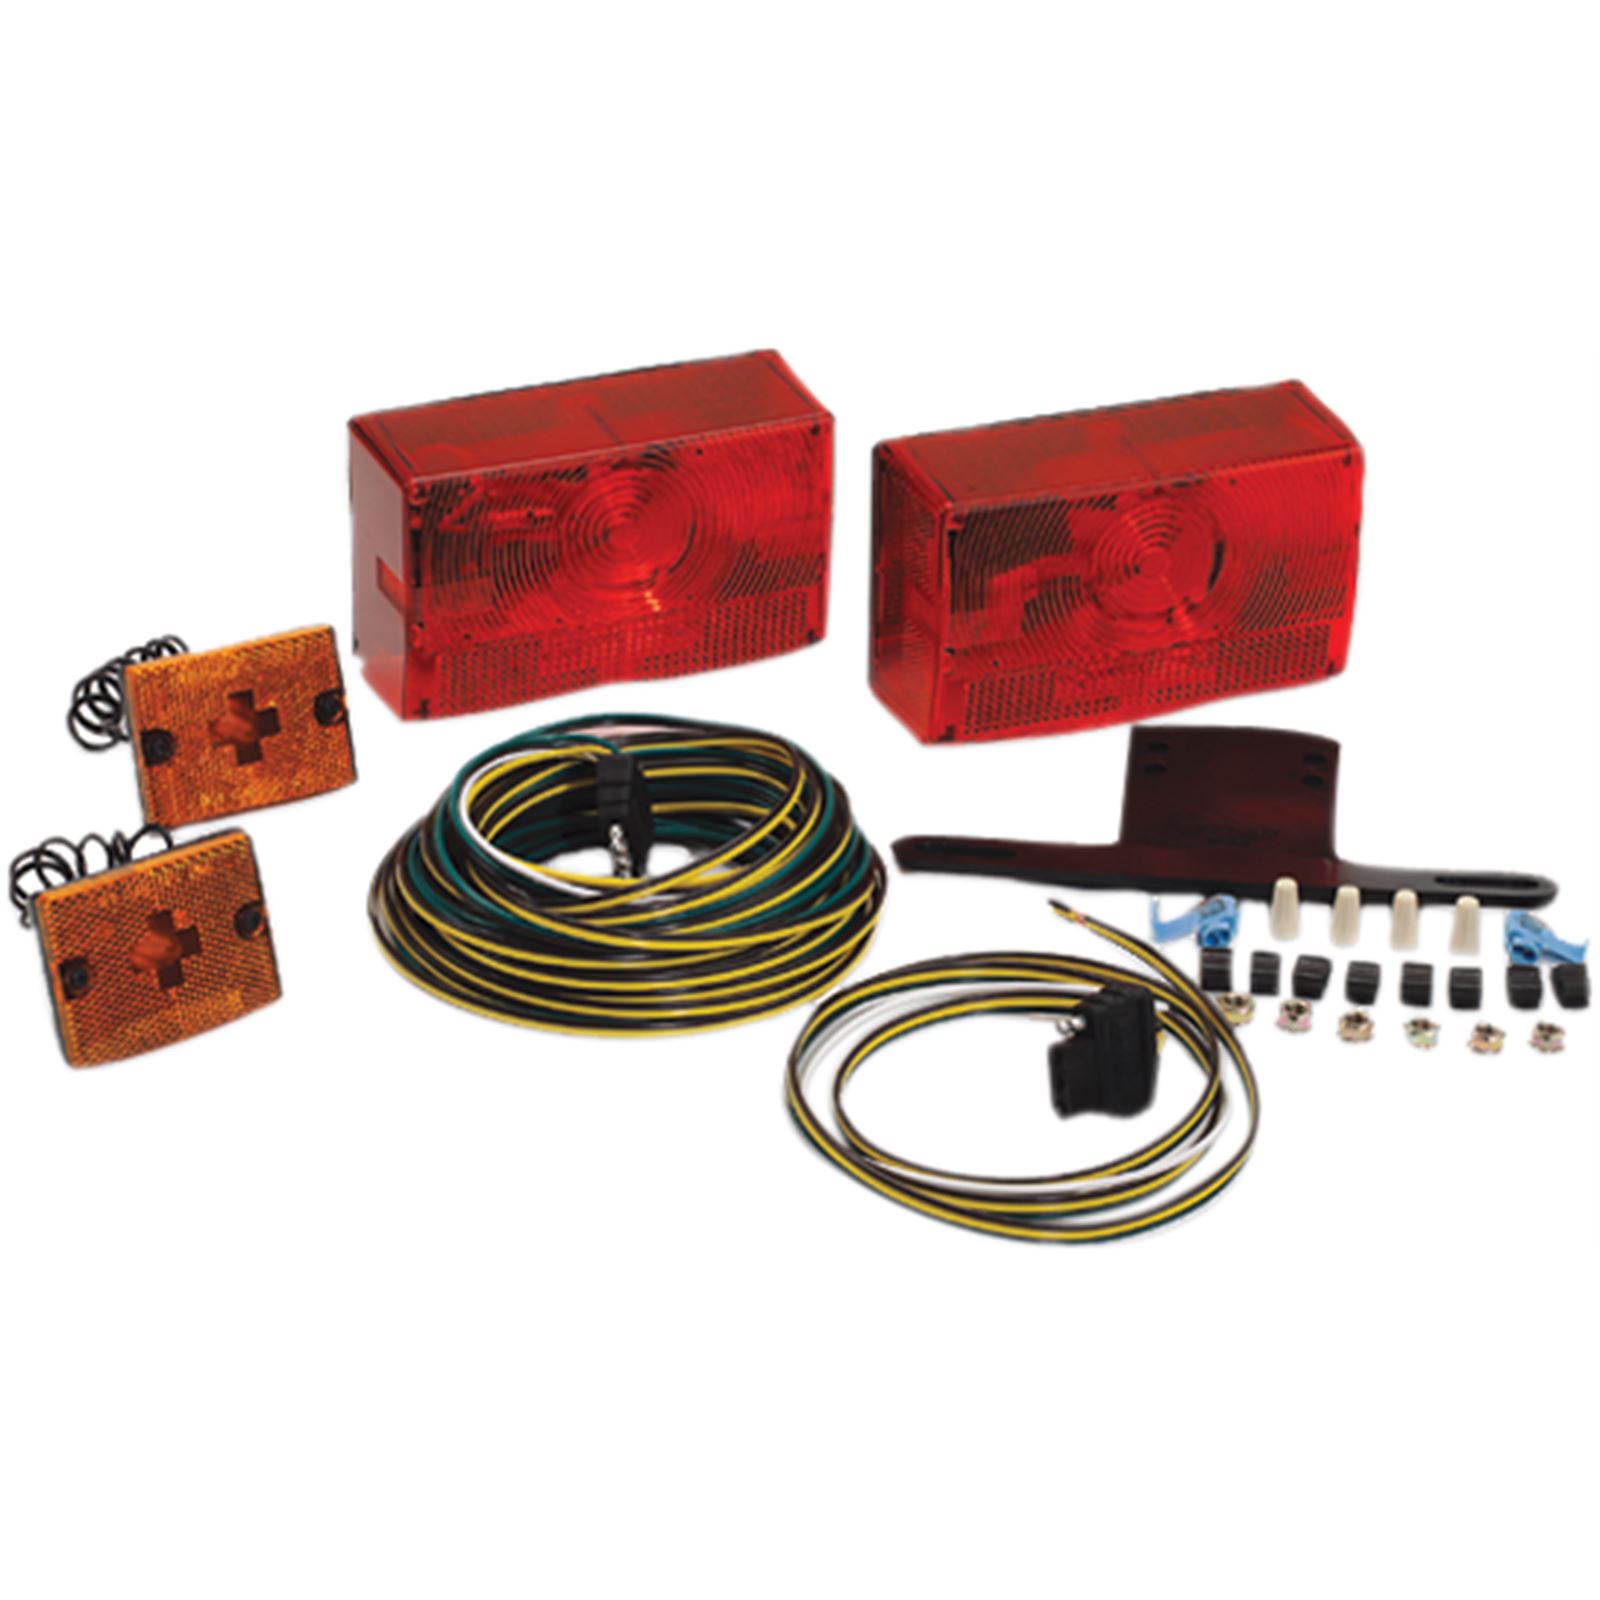 Wesbar Submersible Taillight Kit